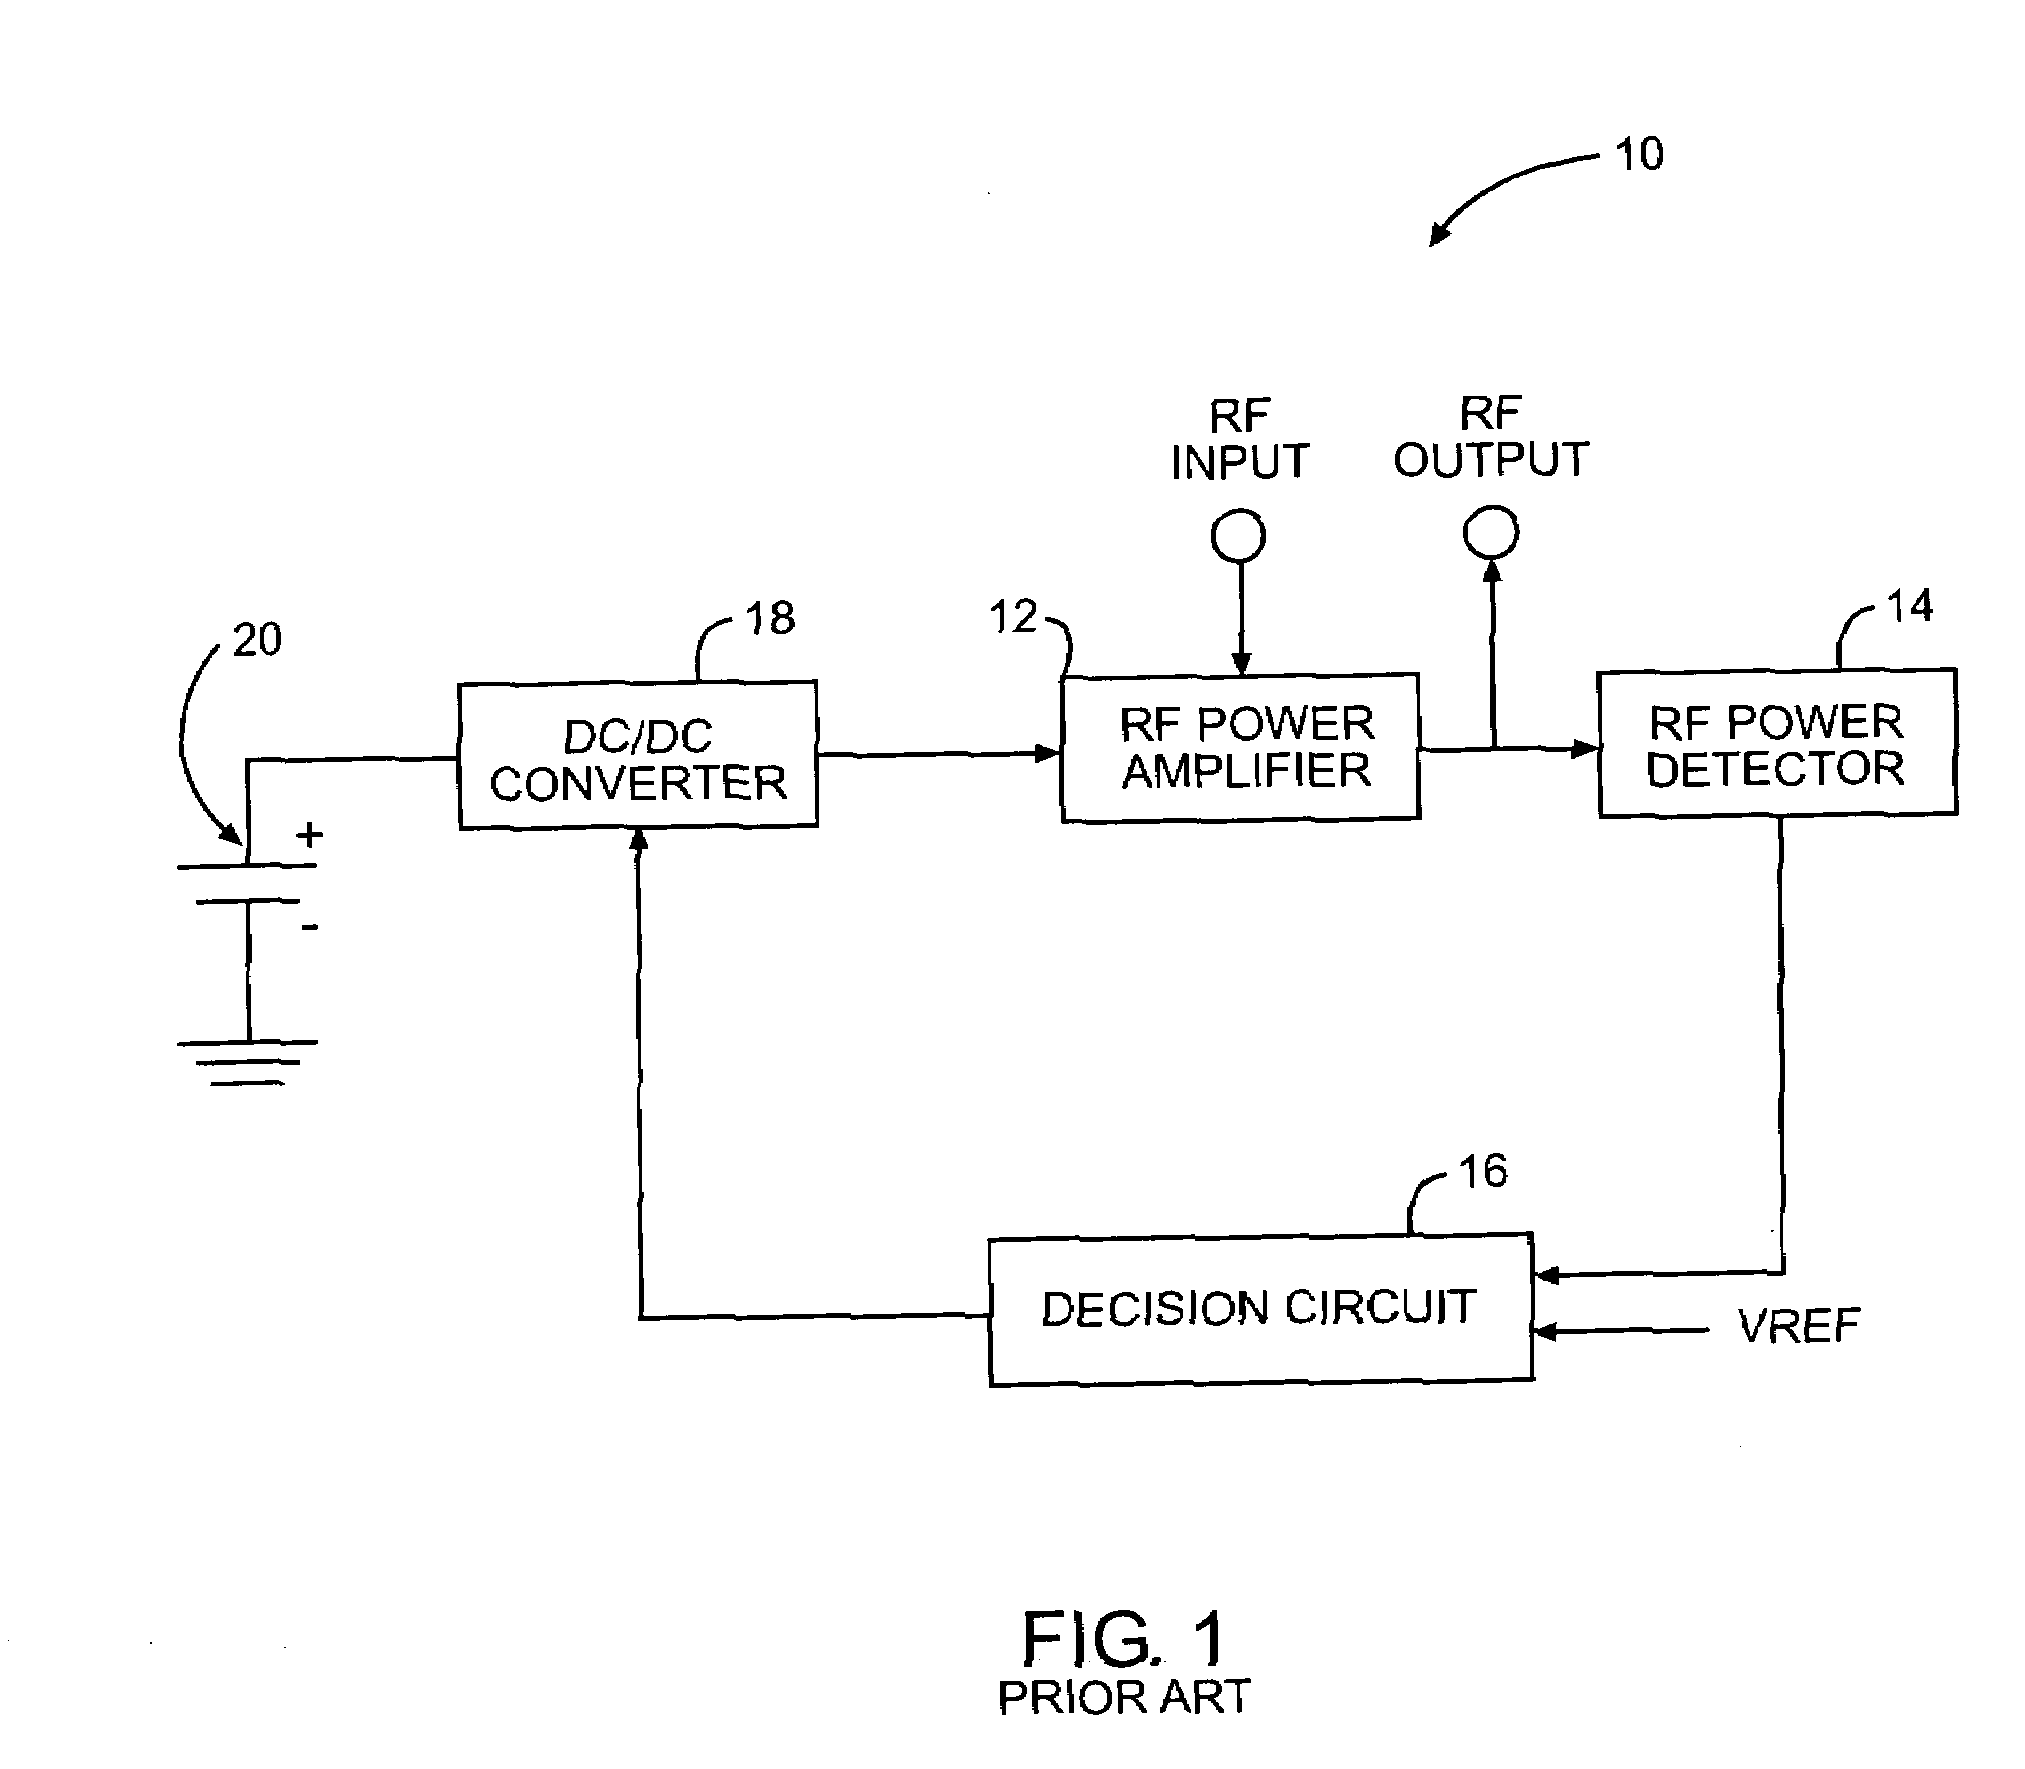 Sliding bias controller for use with radio frequency power amplifiers